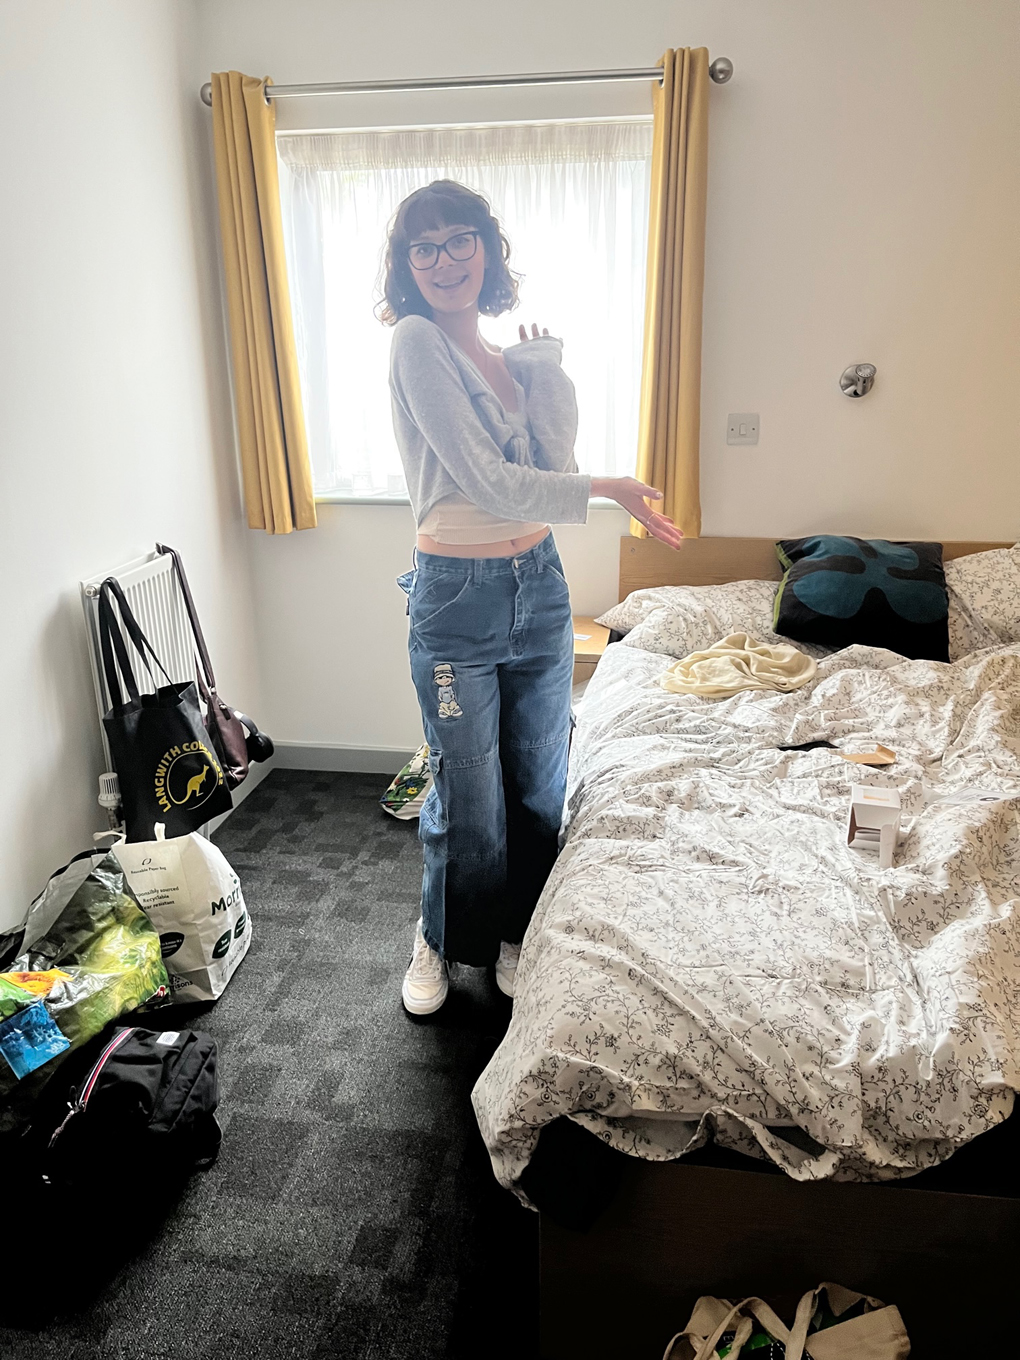 A happy looking young women in jeans and a grey cardigan points at an untidy bed